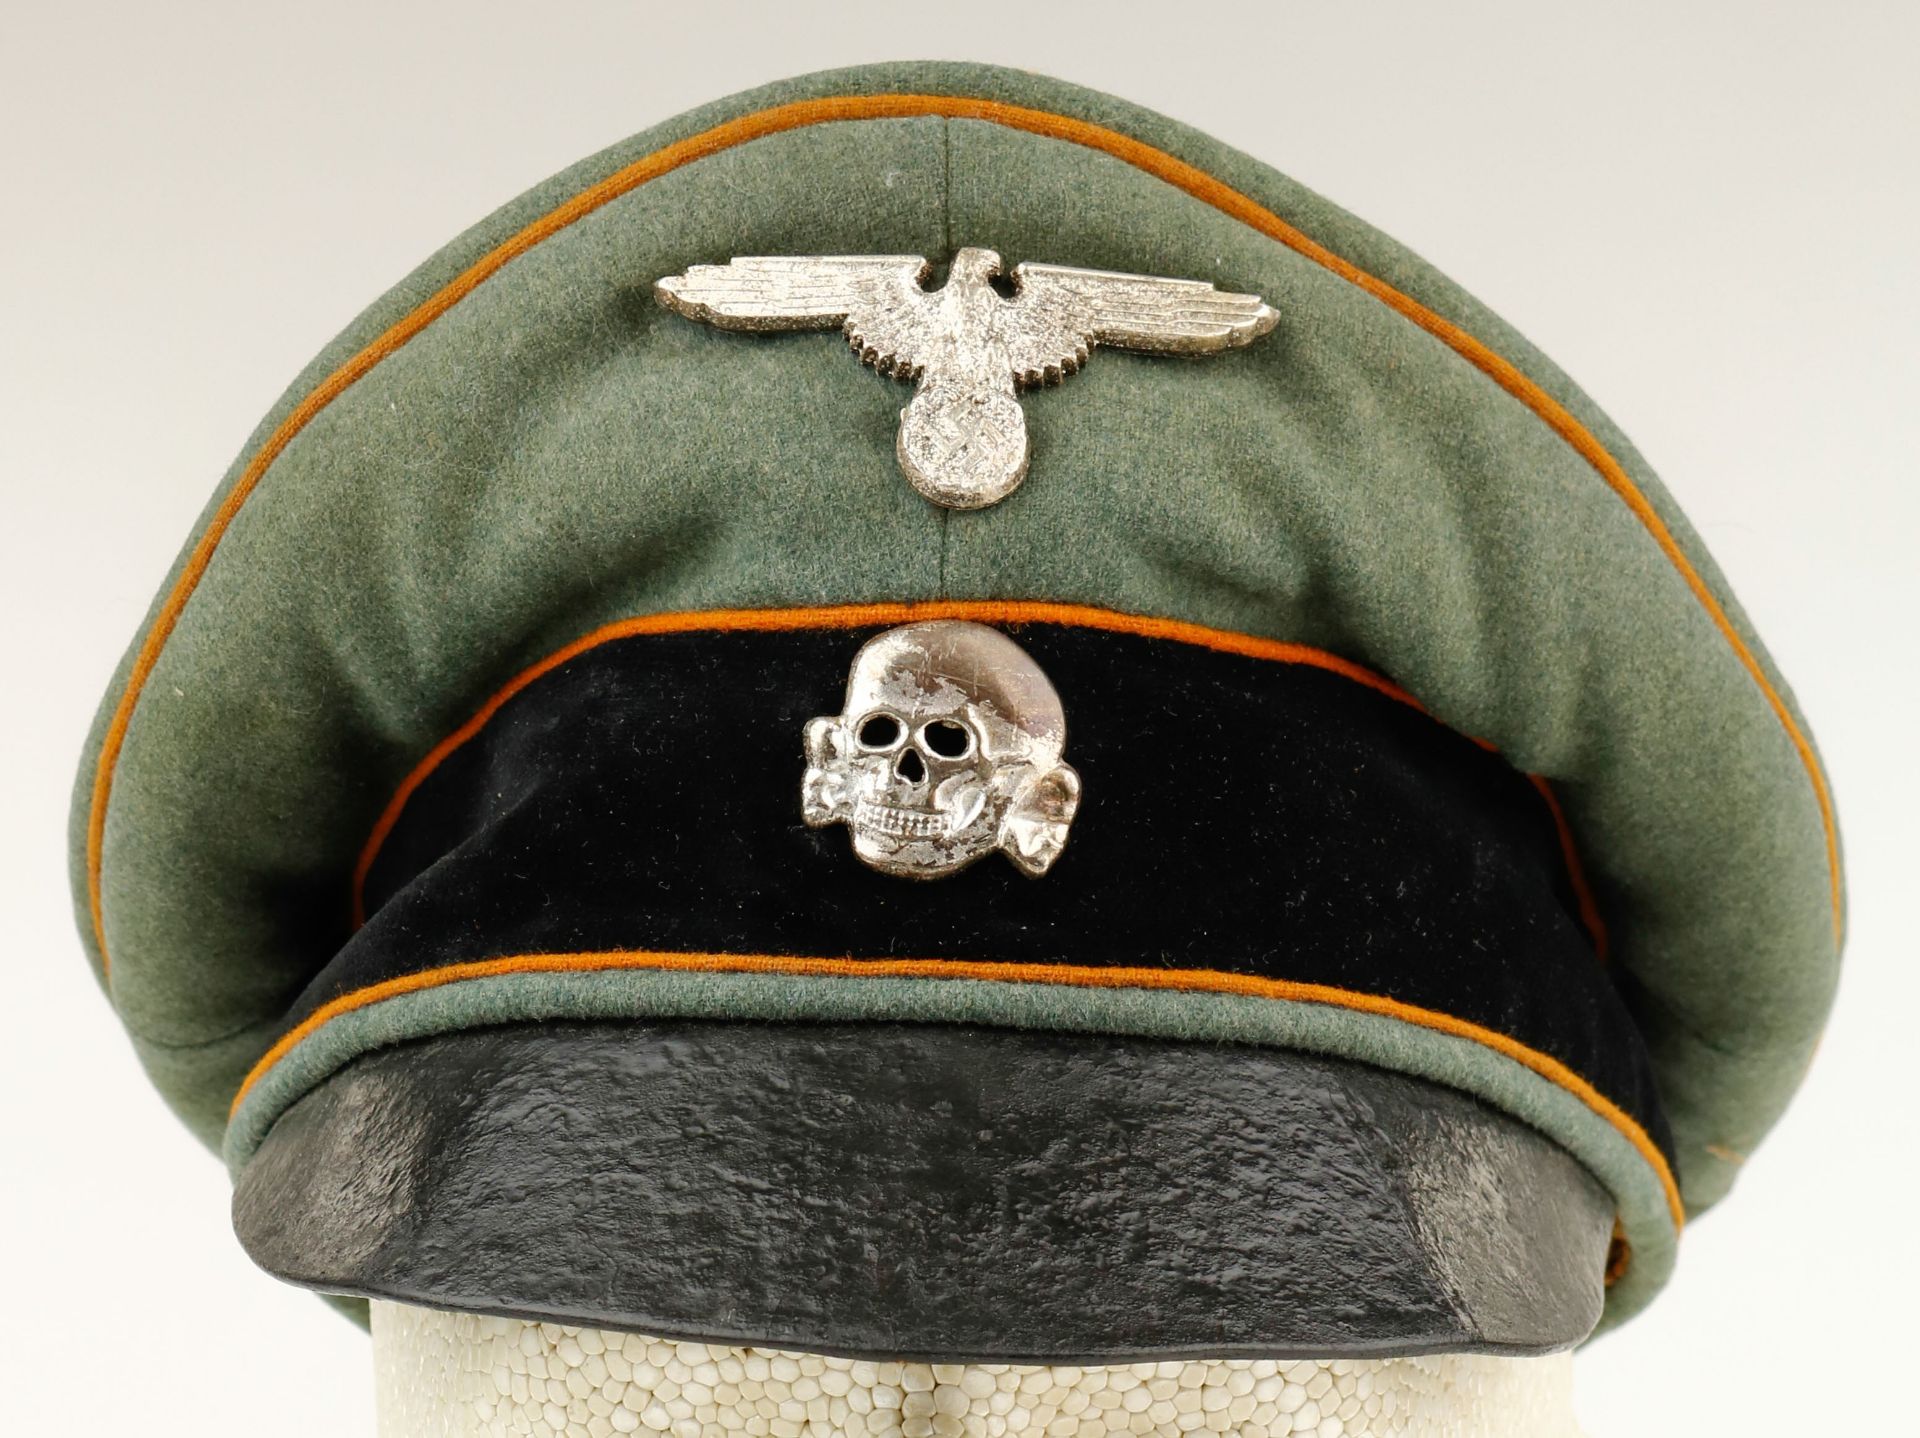 SS CONCENTRATION CAMP 'CRUSHER' VISOR CAP - Image 8 of 17